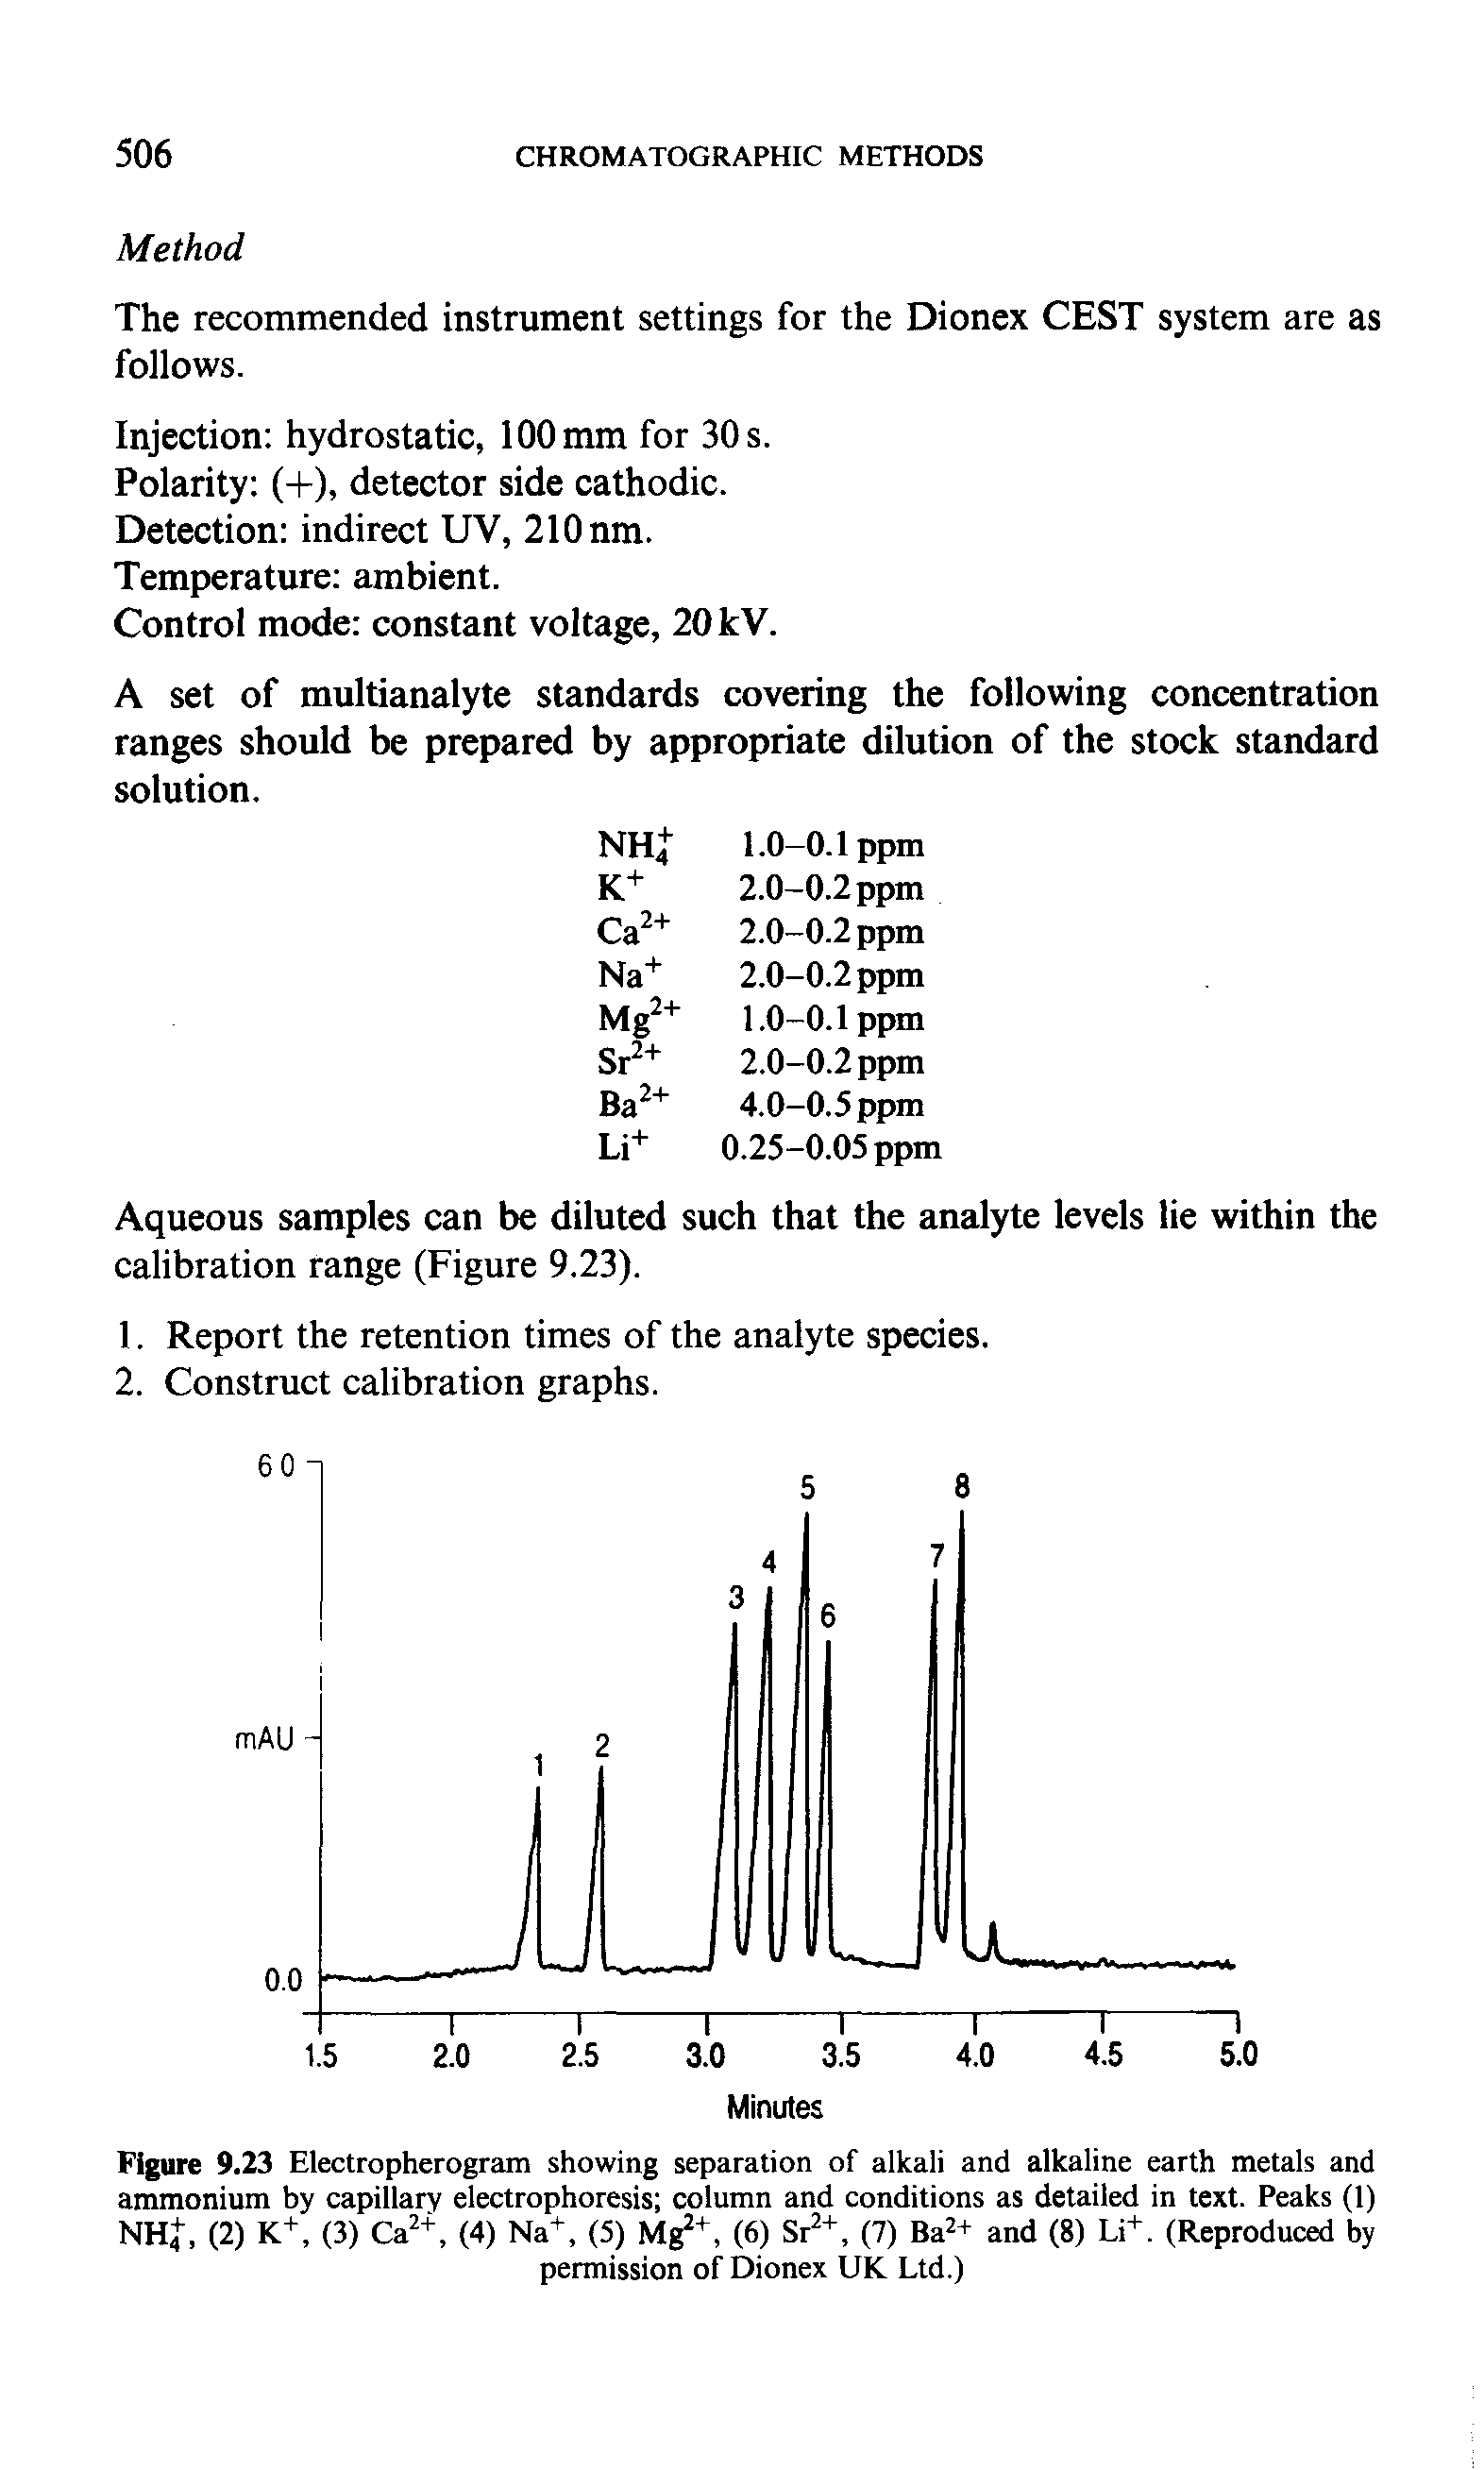 Figure 9.23 Electropherogram showing separation of alkali and alkaline earth metals and ammonium by capillary electrophoresis column and conditions as detailed in text. Peaks (1) NHj, (2) K+, (3) Ca +, (4) Na+, (5) Mg +, (6) Sr +, (7) Ba2+ and (8) Li+. (Reproduced by permission of Dionex UK Ltd.)...